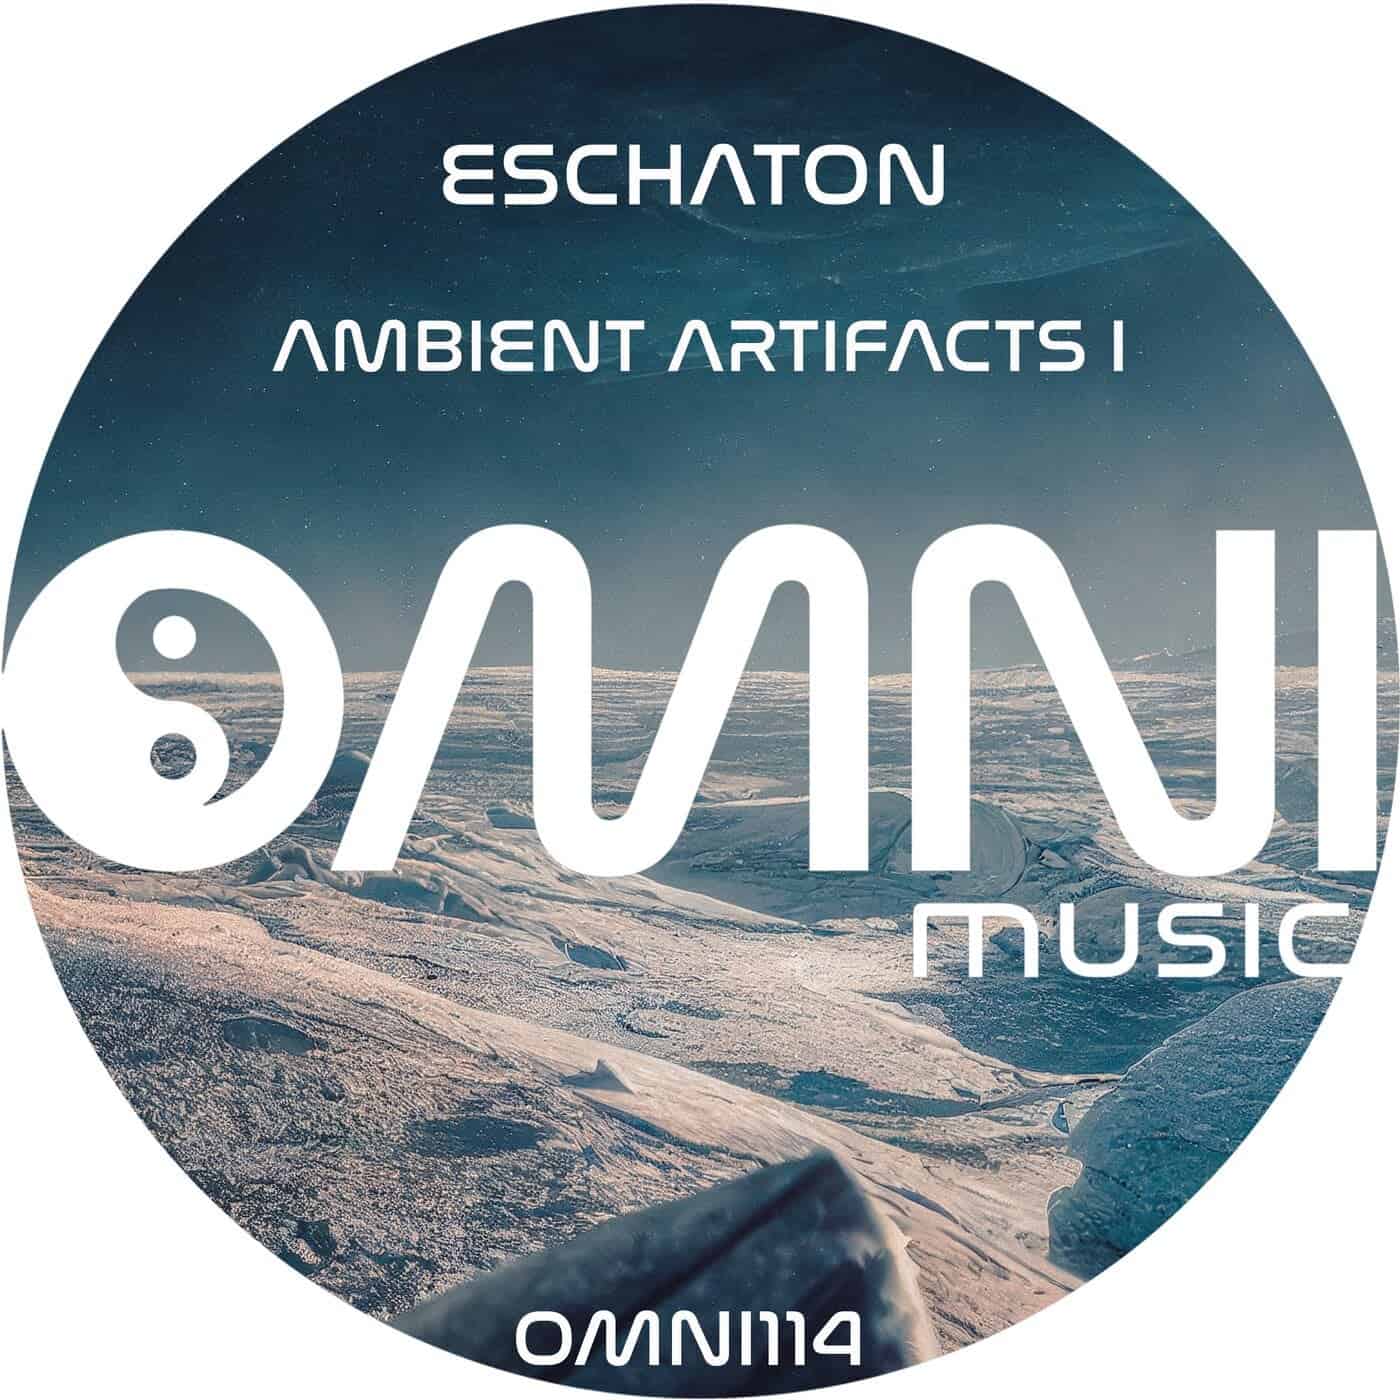 image cover: Eschaton - Ambient Artifacts I / OMNI114